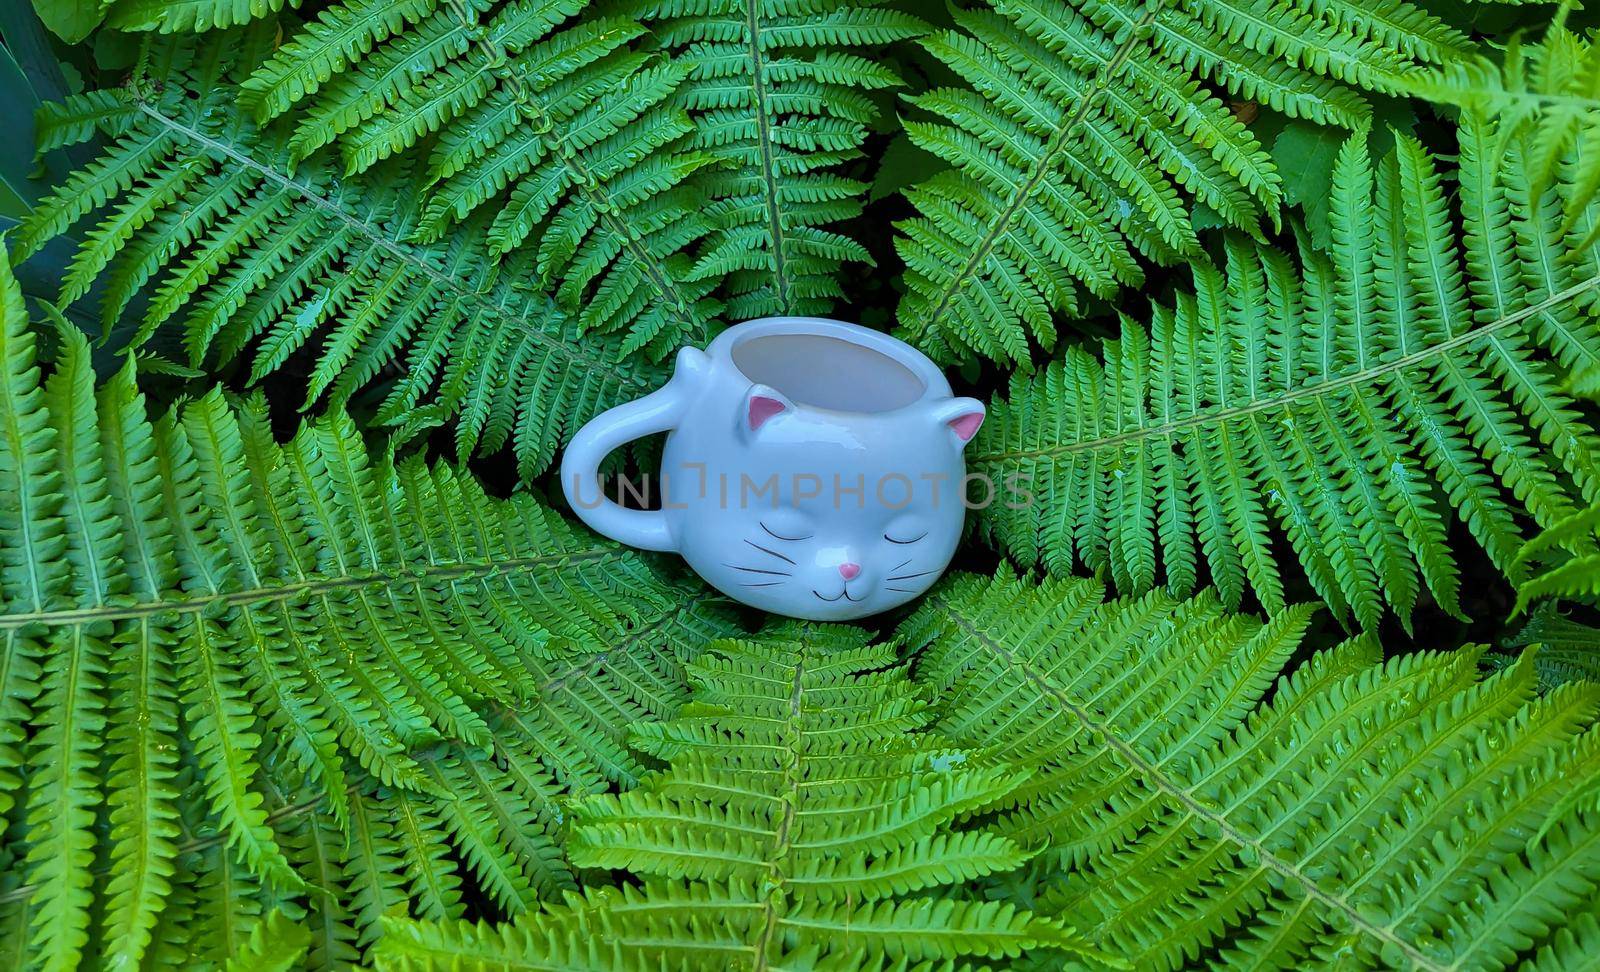 A cup in the shape of a cat's head in the center of a green background of a shuttlecock fern